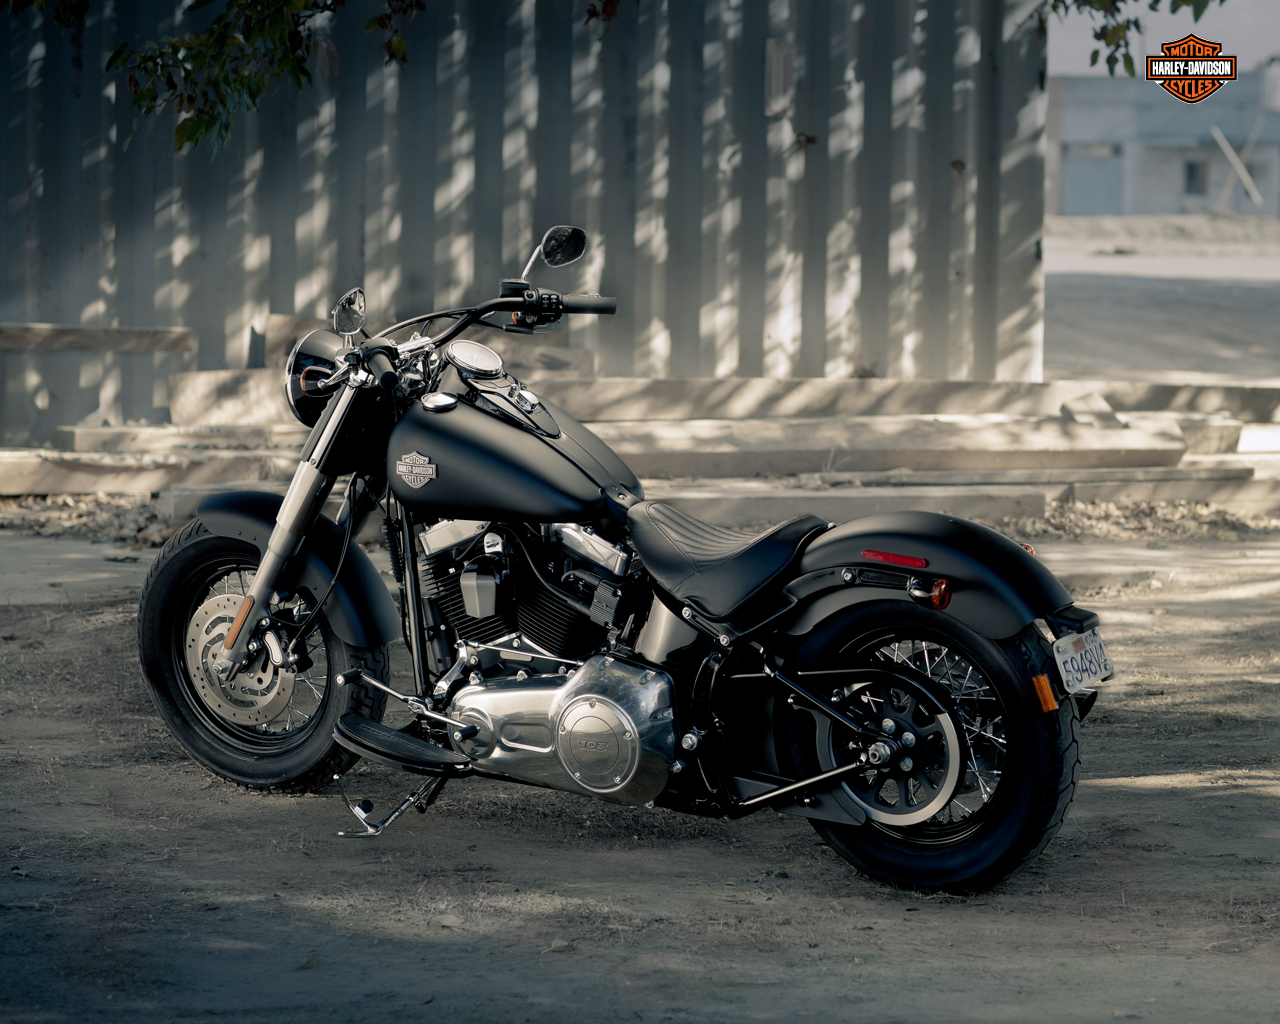 Harley-Davidson Softail Slim Backgrounds, Compatible - PC, Mobile, Gadgets| 1280x1024 px